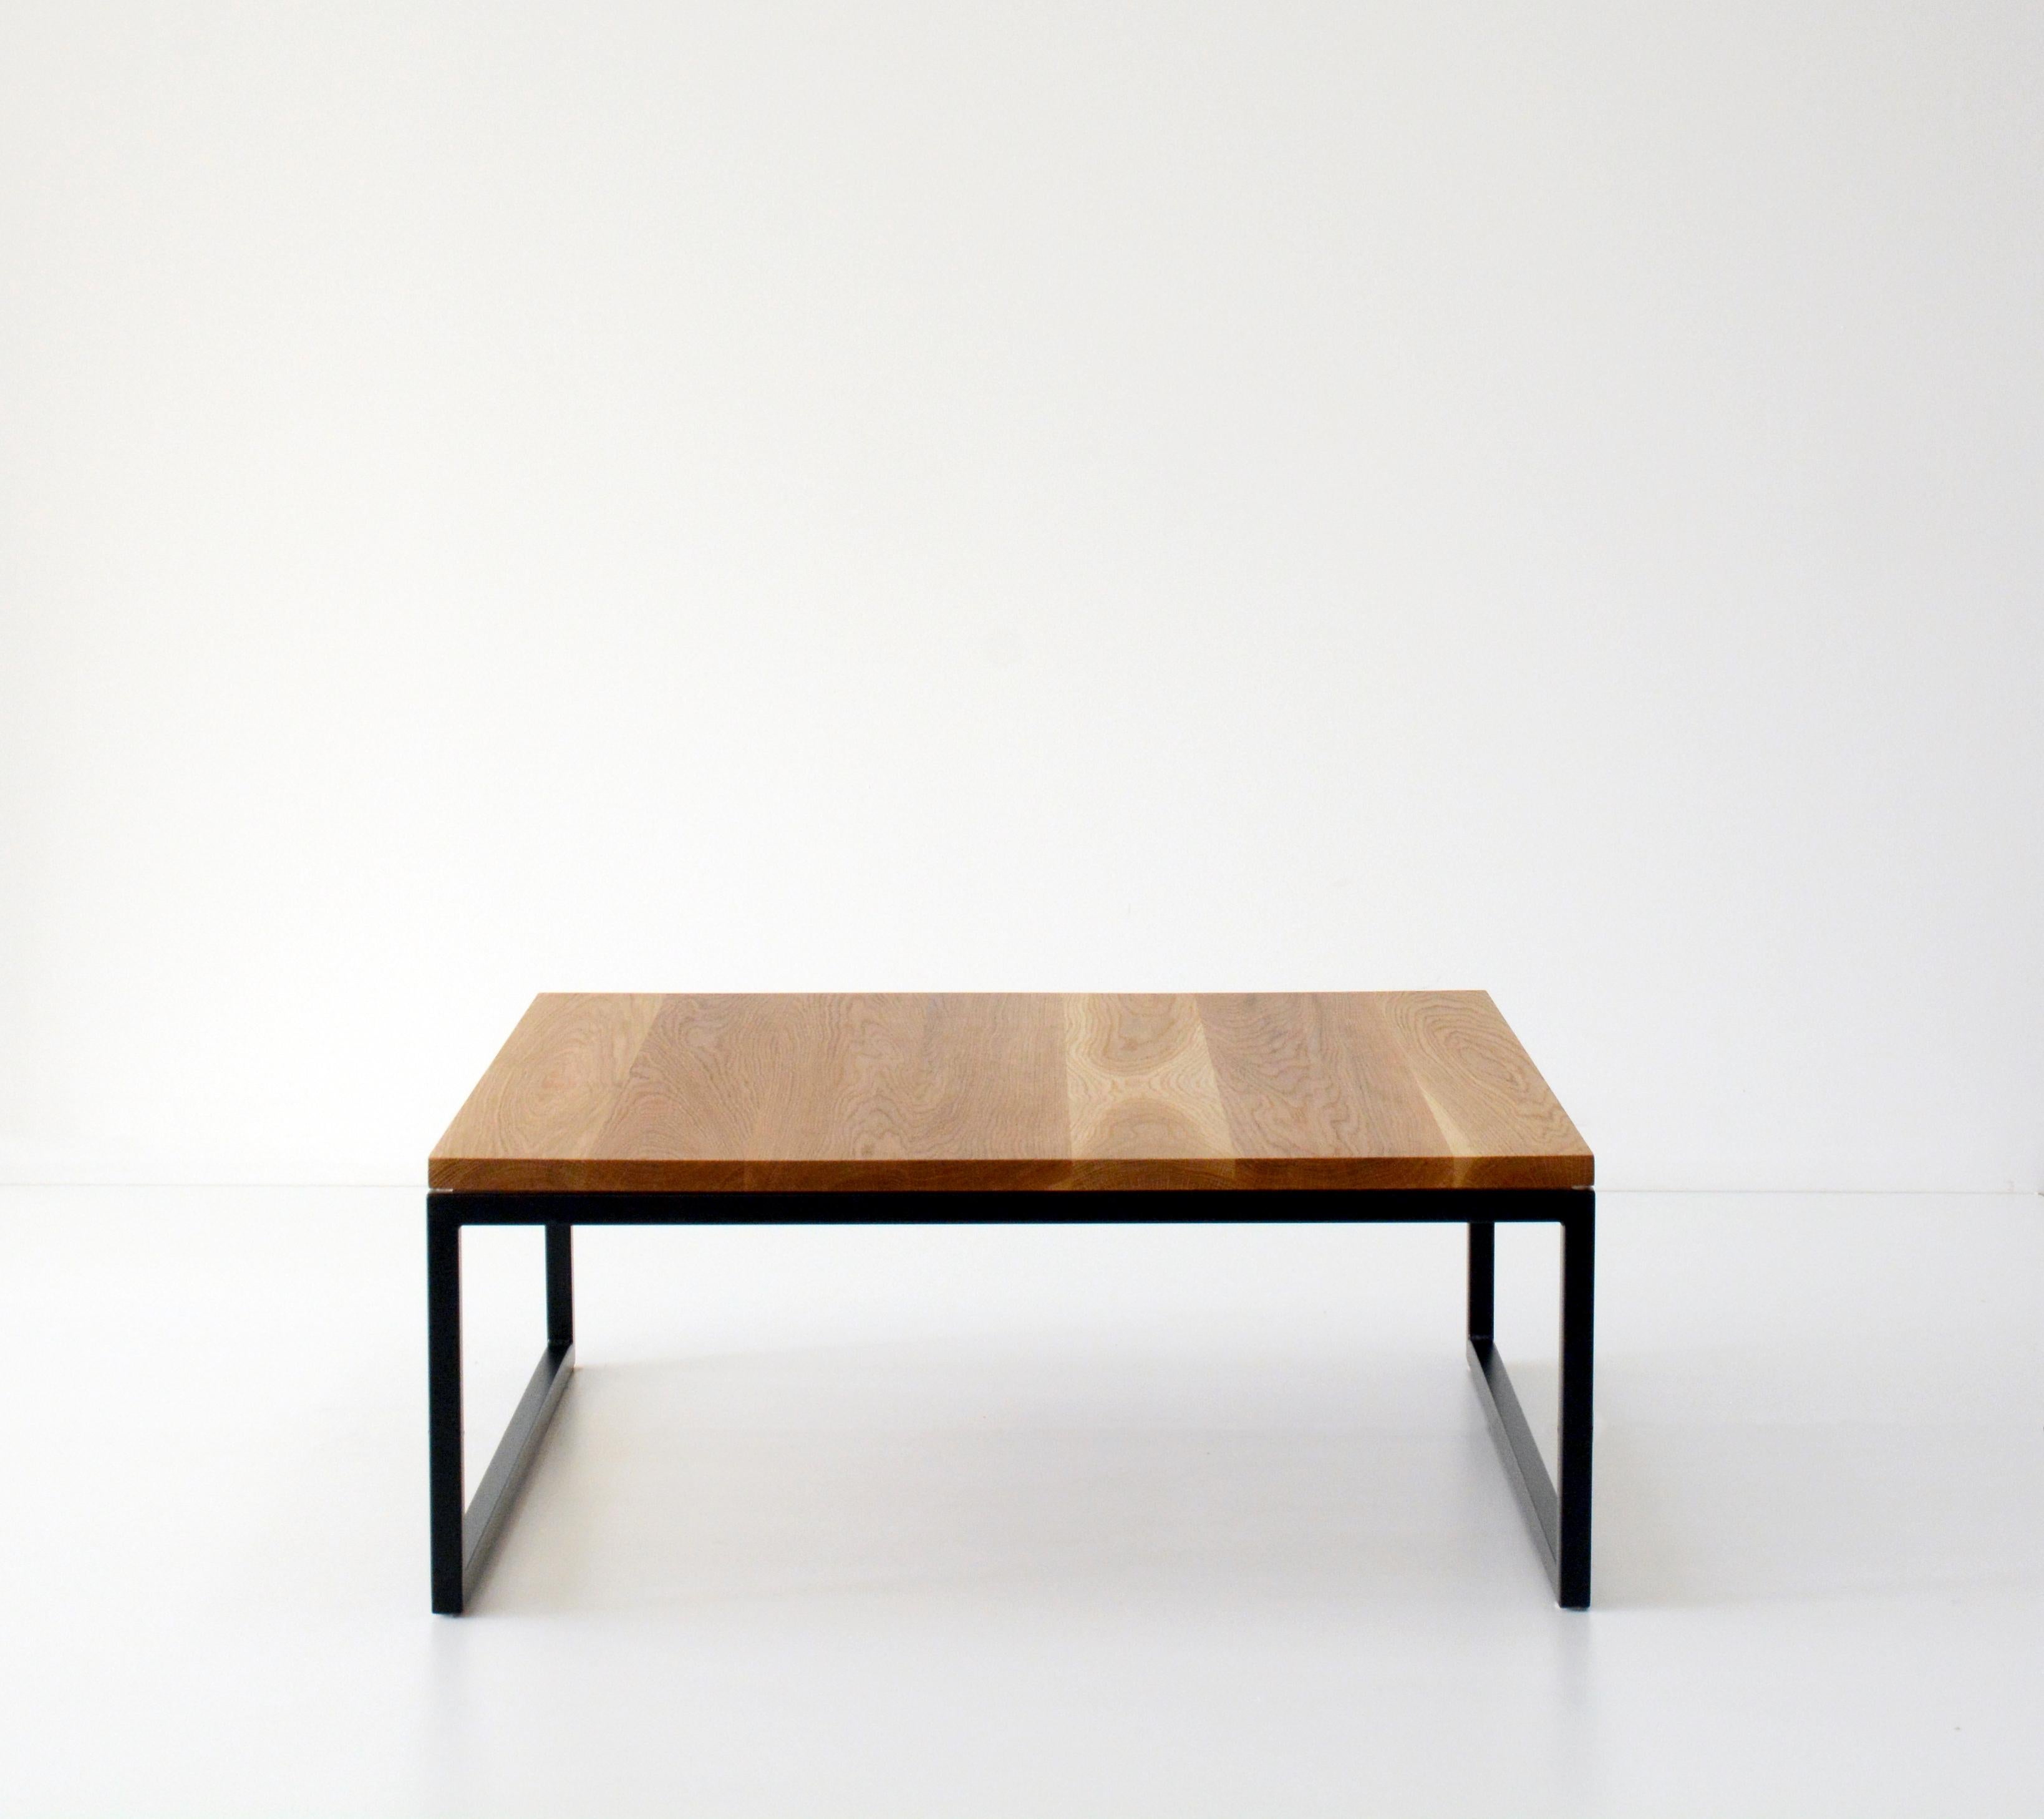 Oak small Fort York coffee table by Hollis & Morris
Dimensions: 36